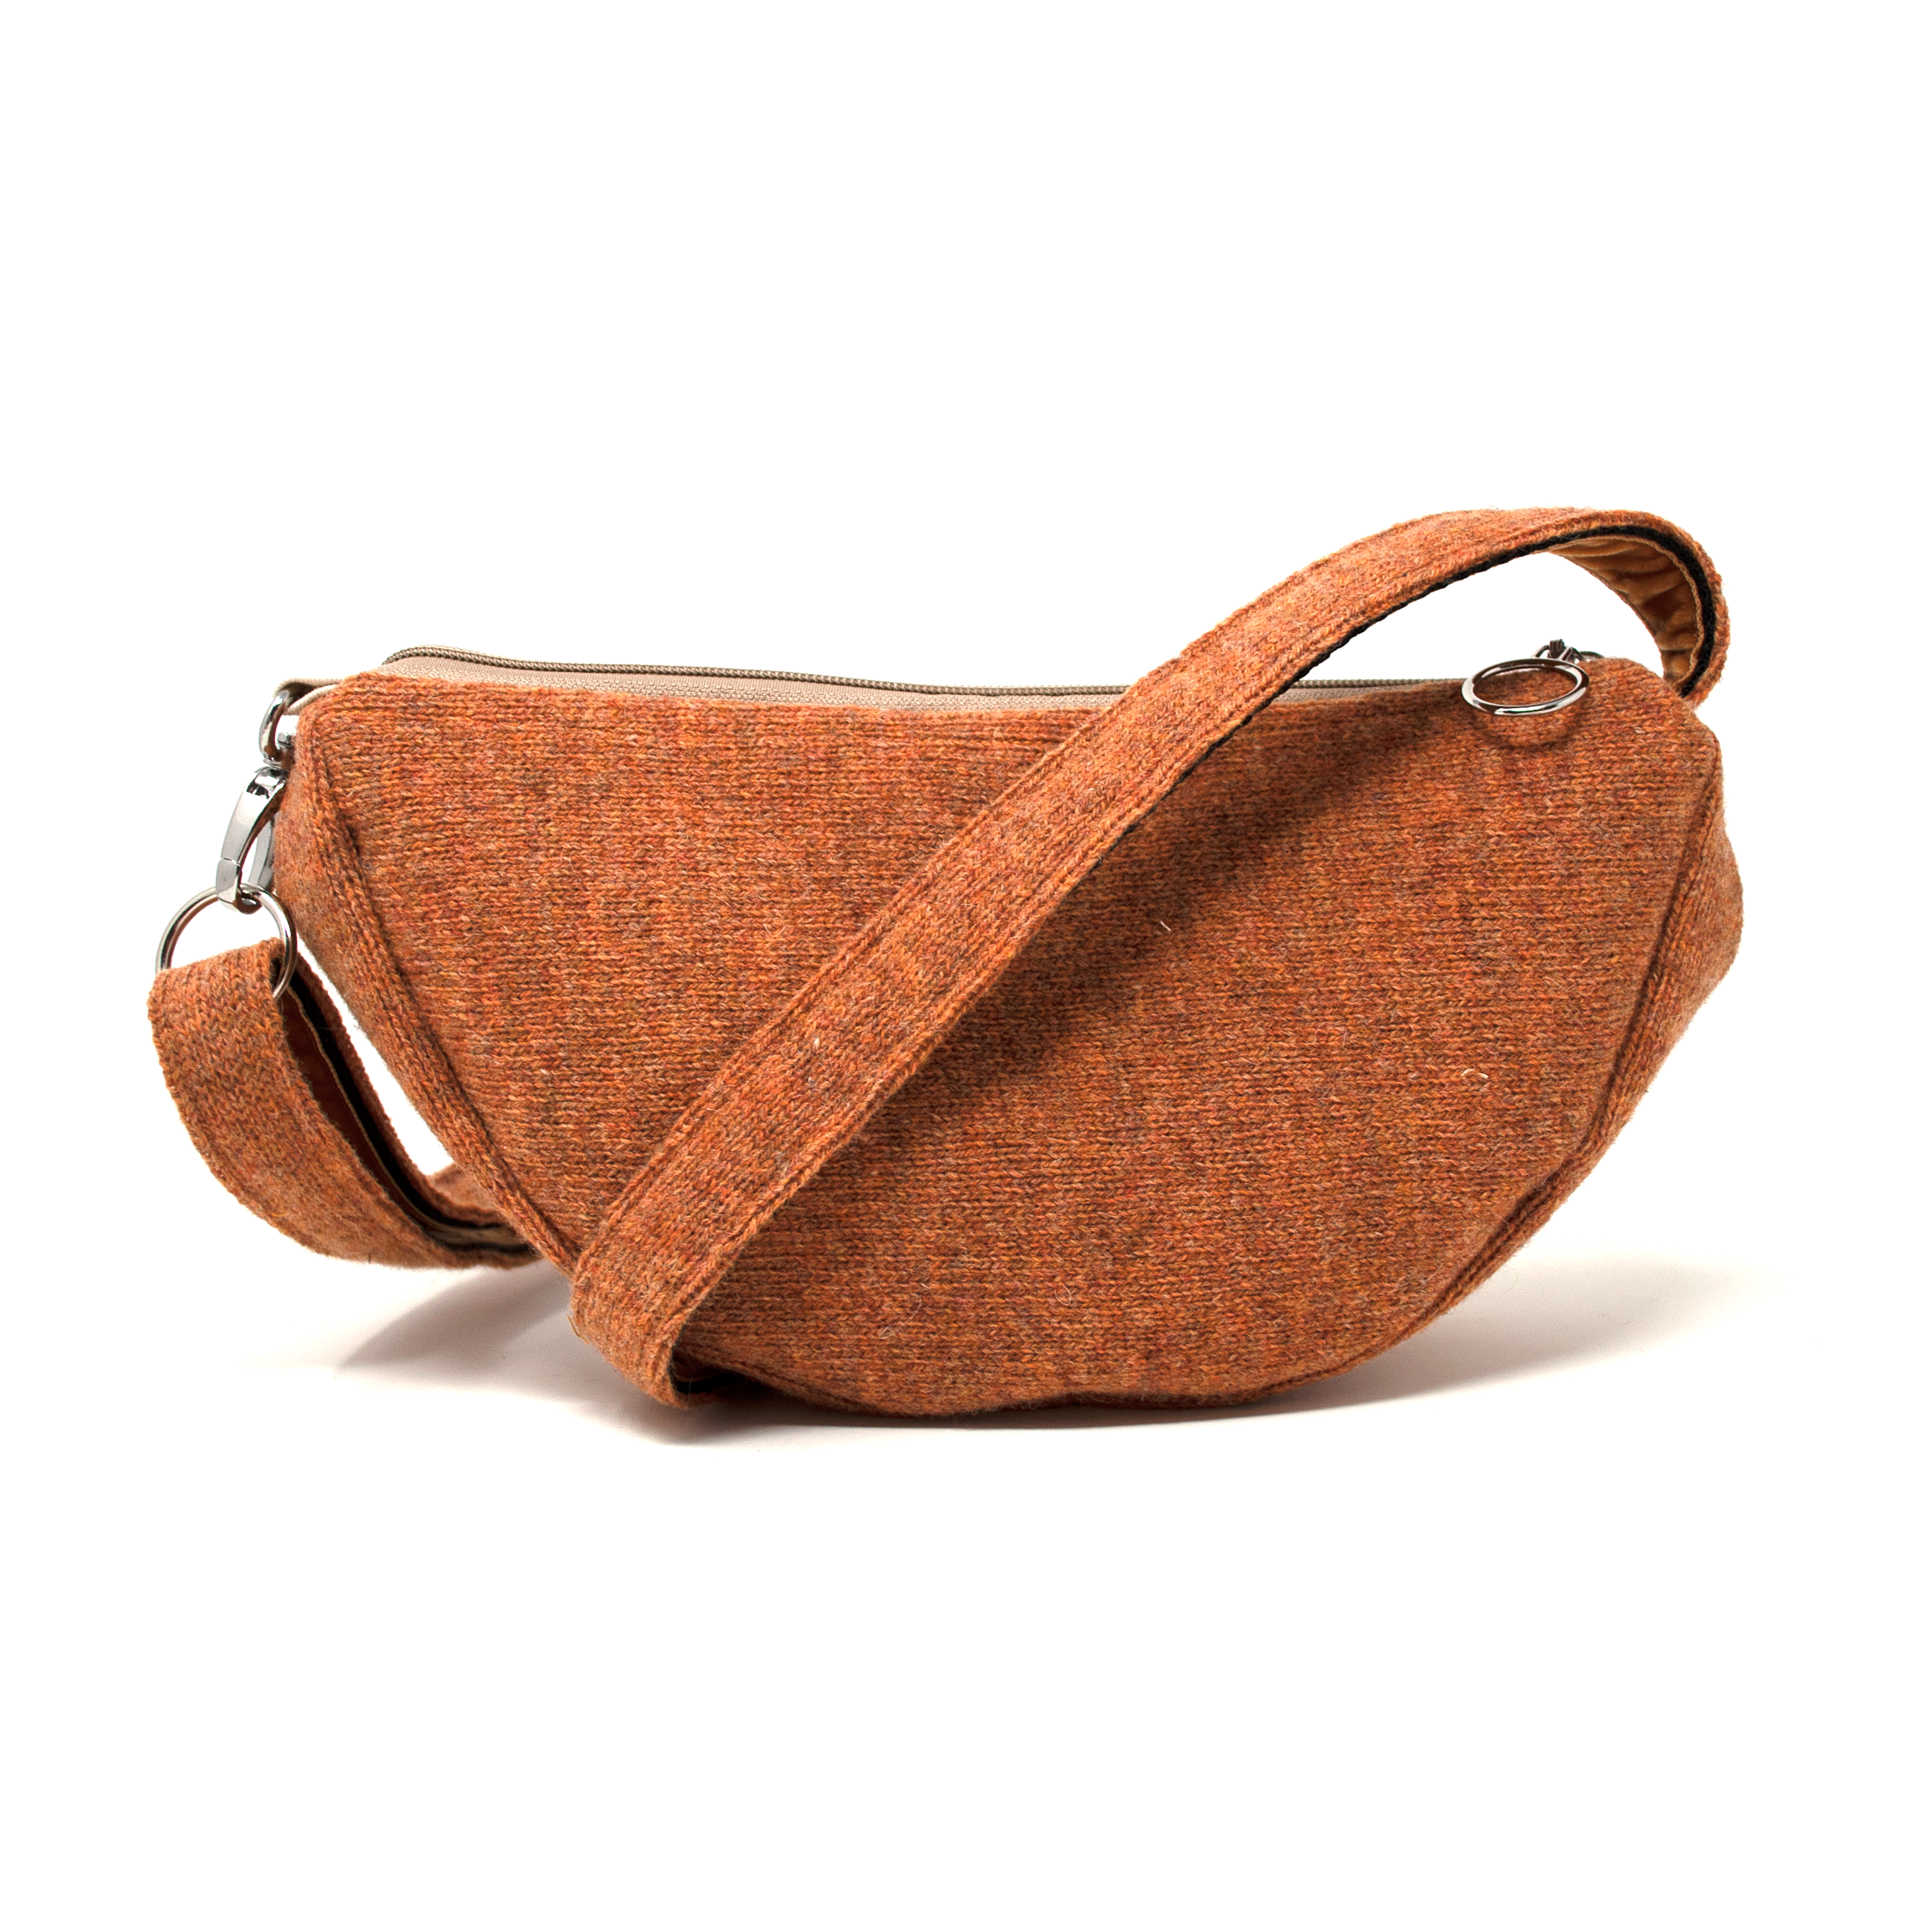 Copper - Autumn/Winter '23 Collection - Luxury Cross Body Bag